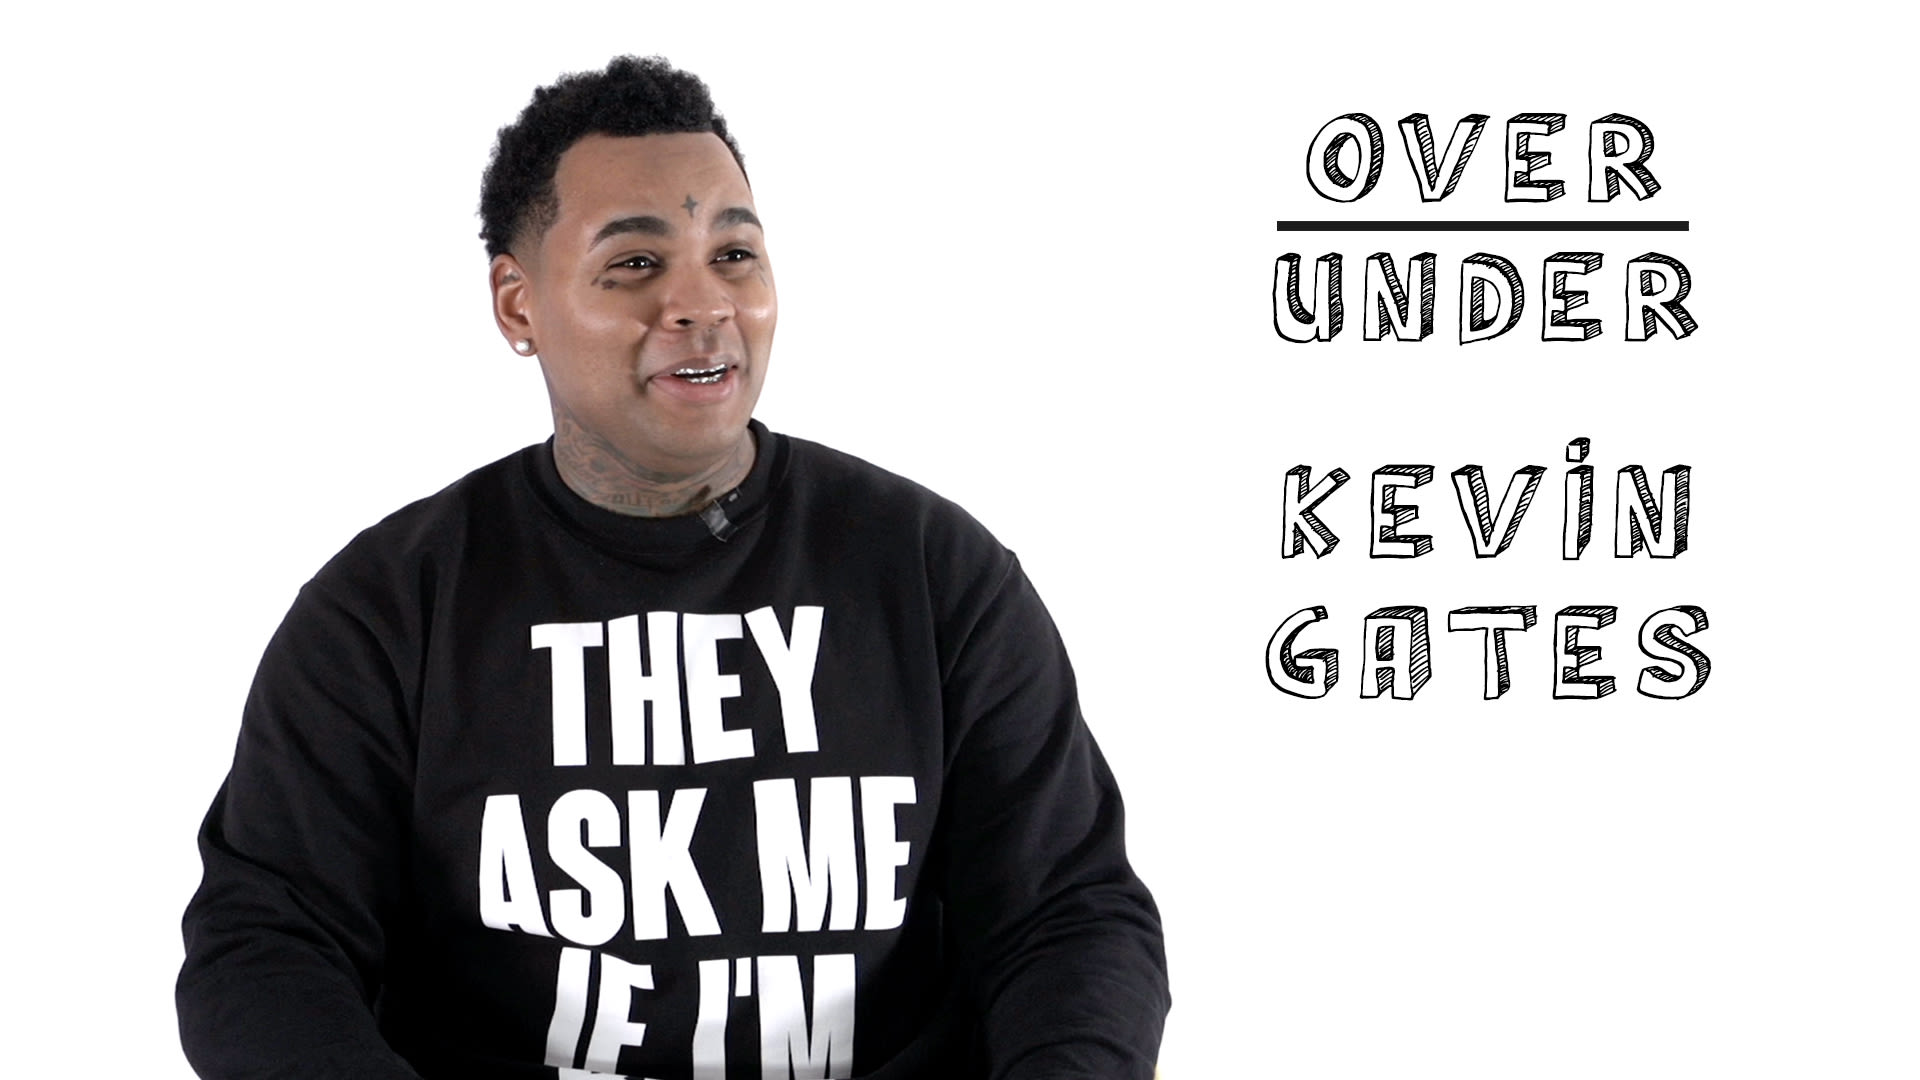 Watch Kevin Gates Rates Leonardo DiCaprio, Taylor Swift, and the Red Hot Chili Peppers Over/Under Over/Under Pitchfork pic